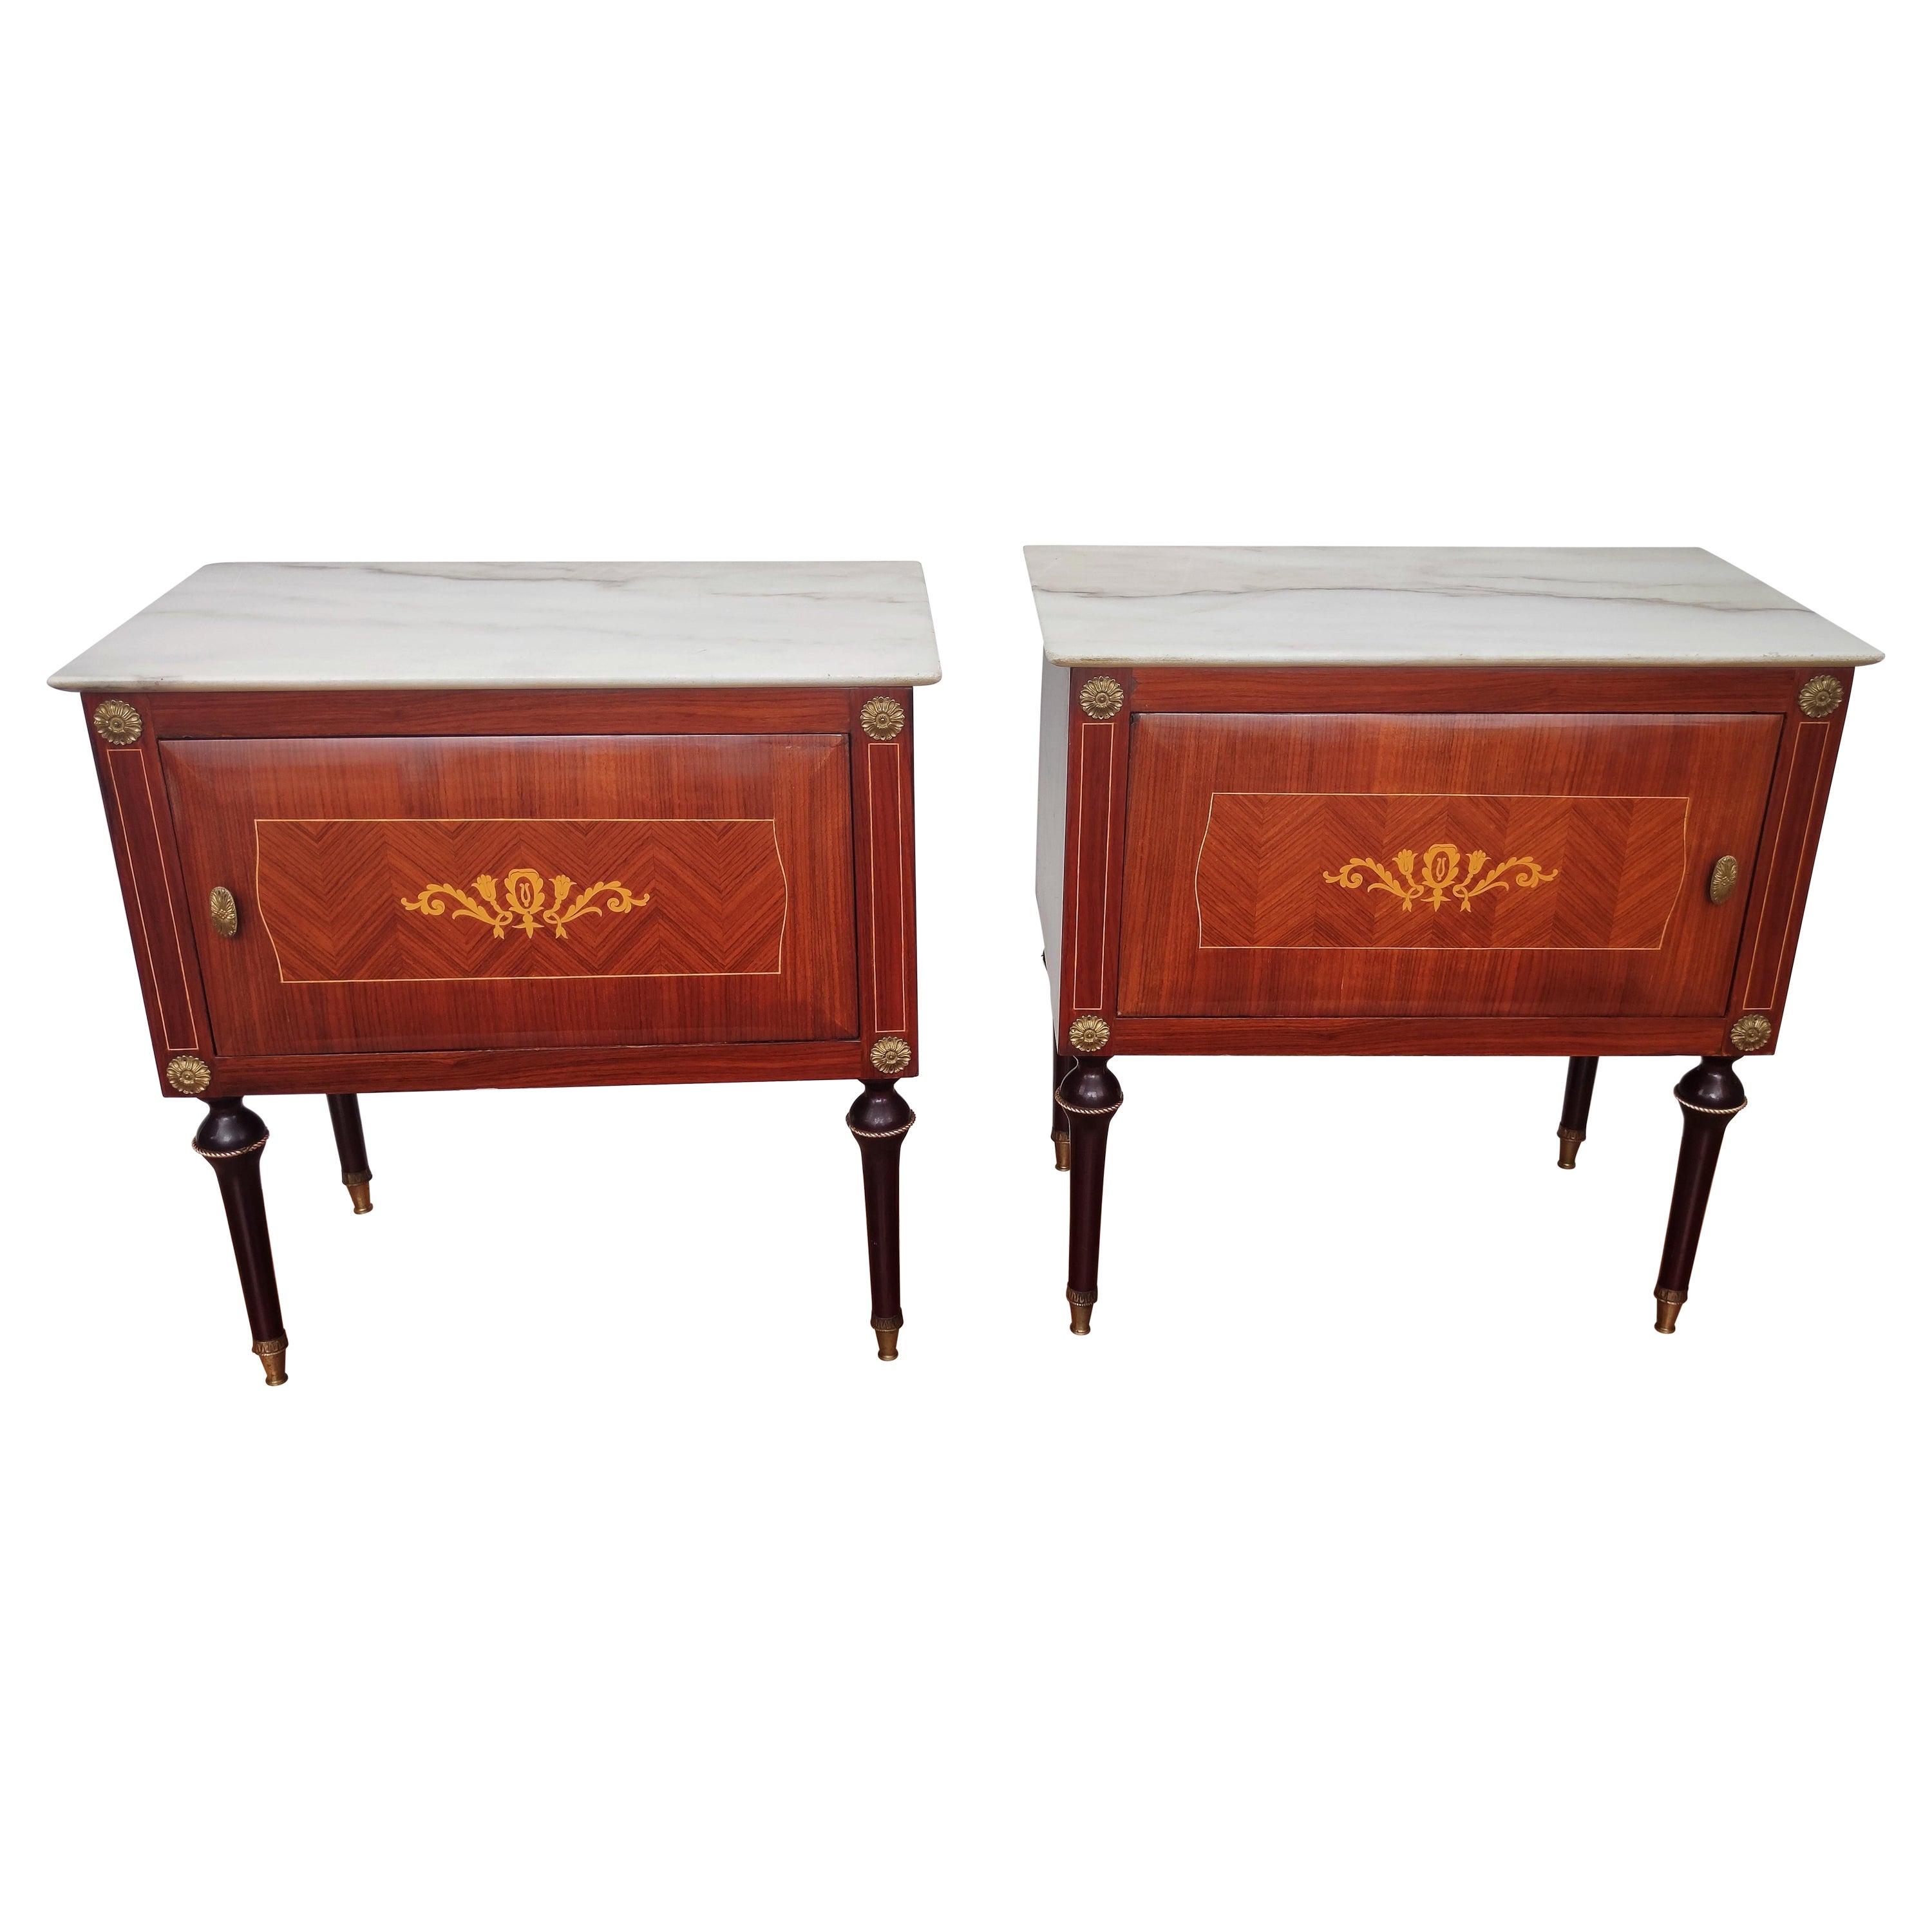 Pair of Italian Midcentury Art Deco Night Stands Walnut and White Marble Top